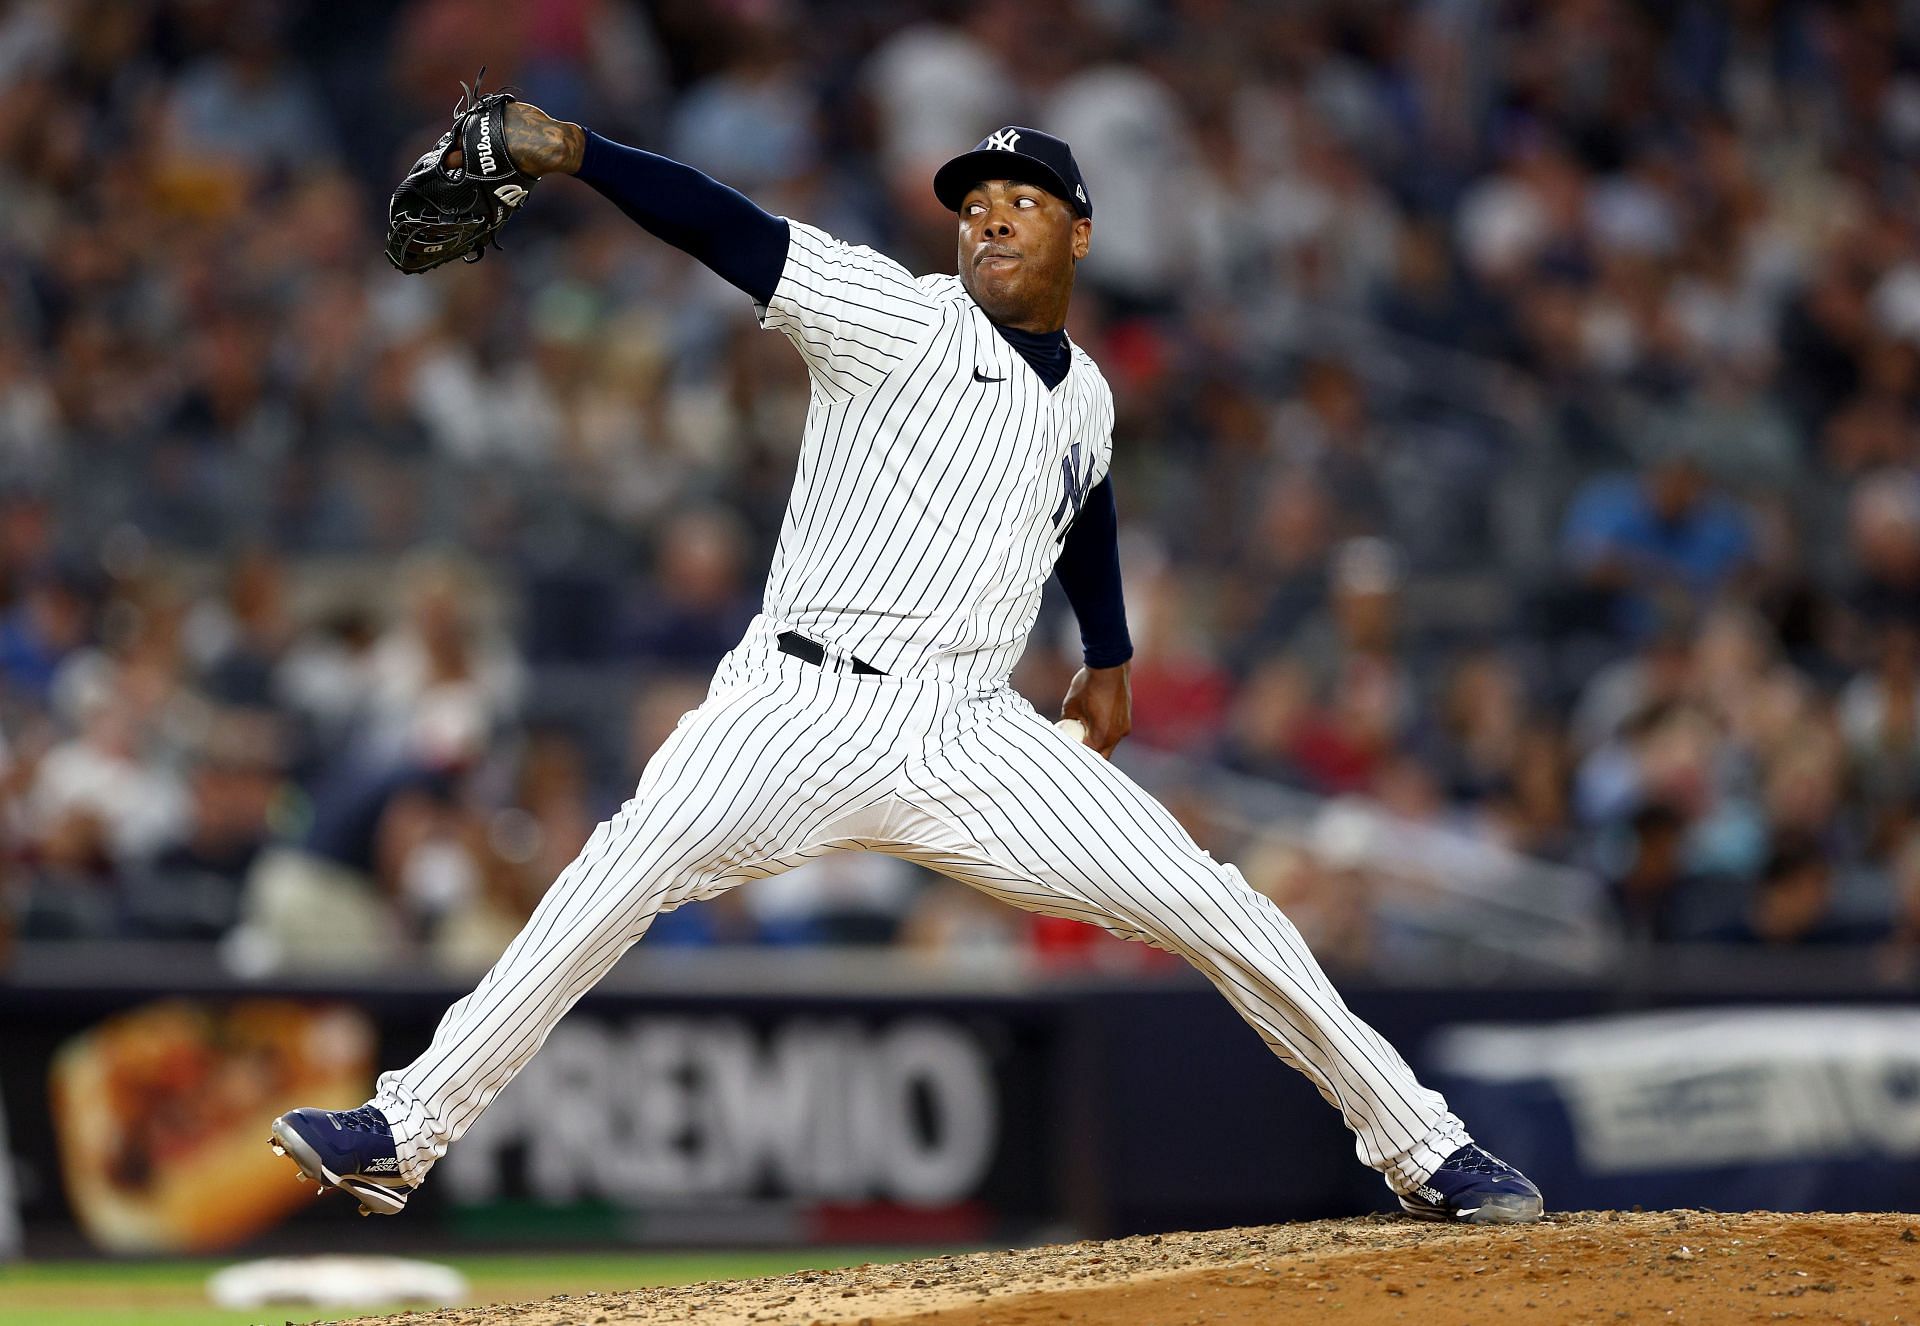 Aroldis Chapman pitches during a Boston Red Sox v New York Yankees game.